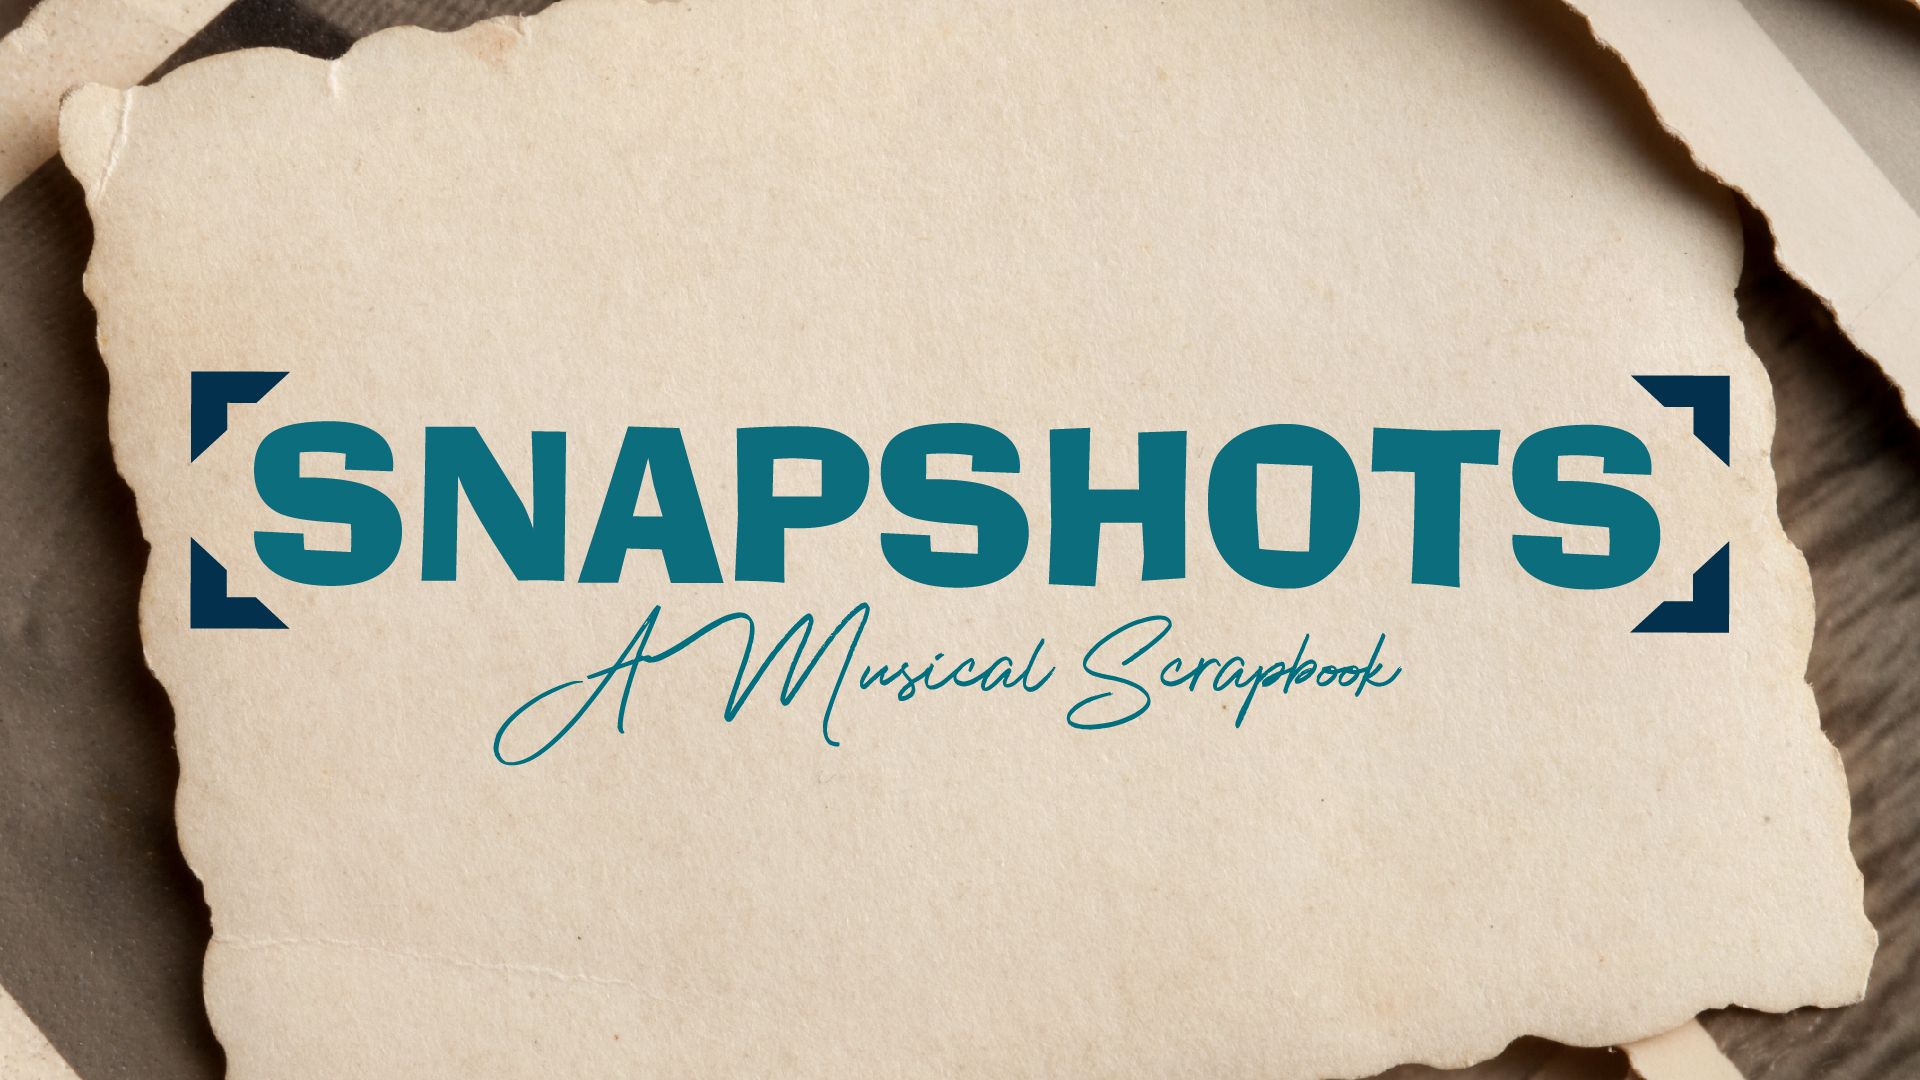 Snapshots logo over an image of rough-edged photo paper